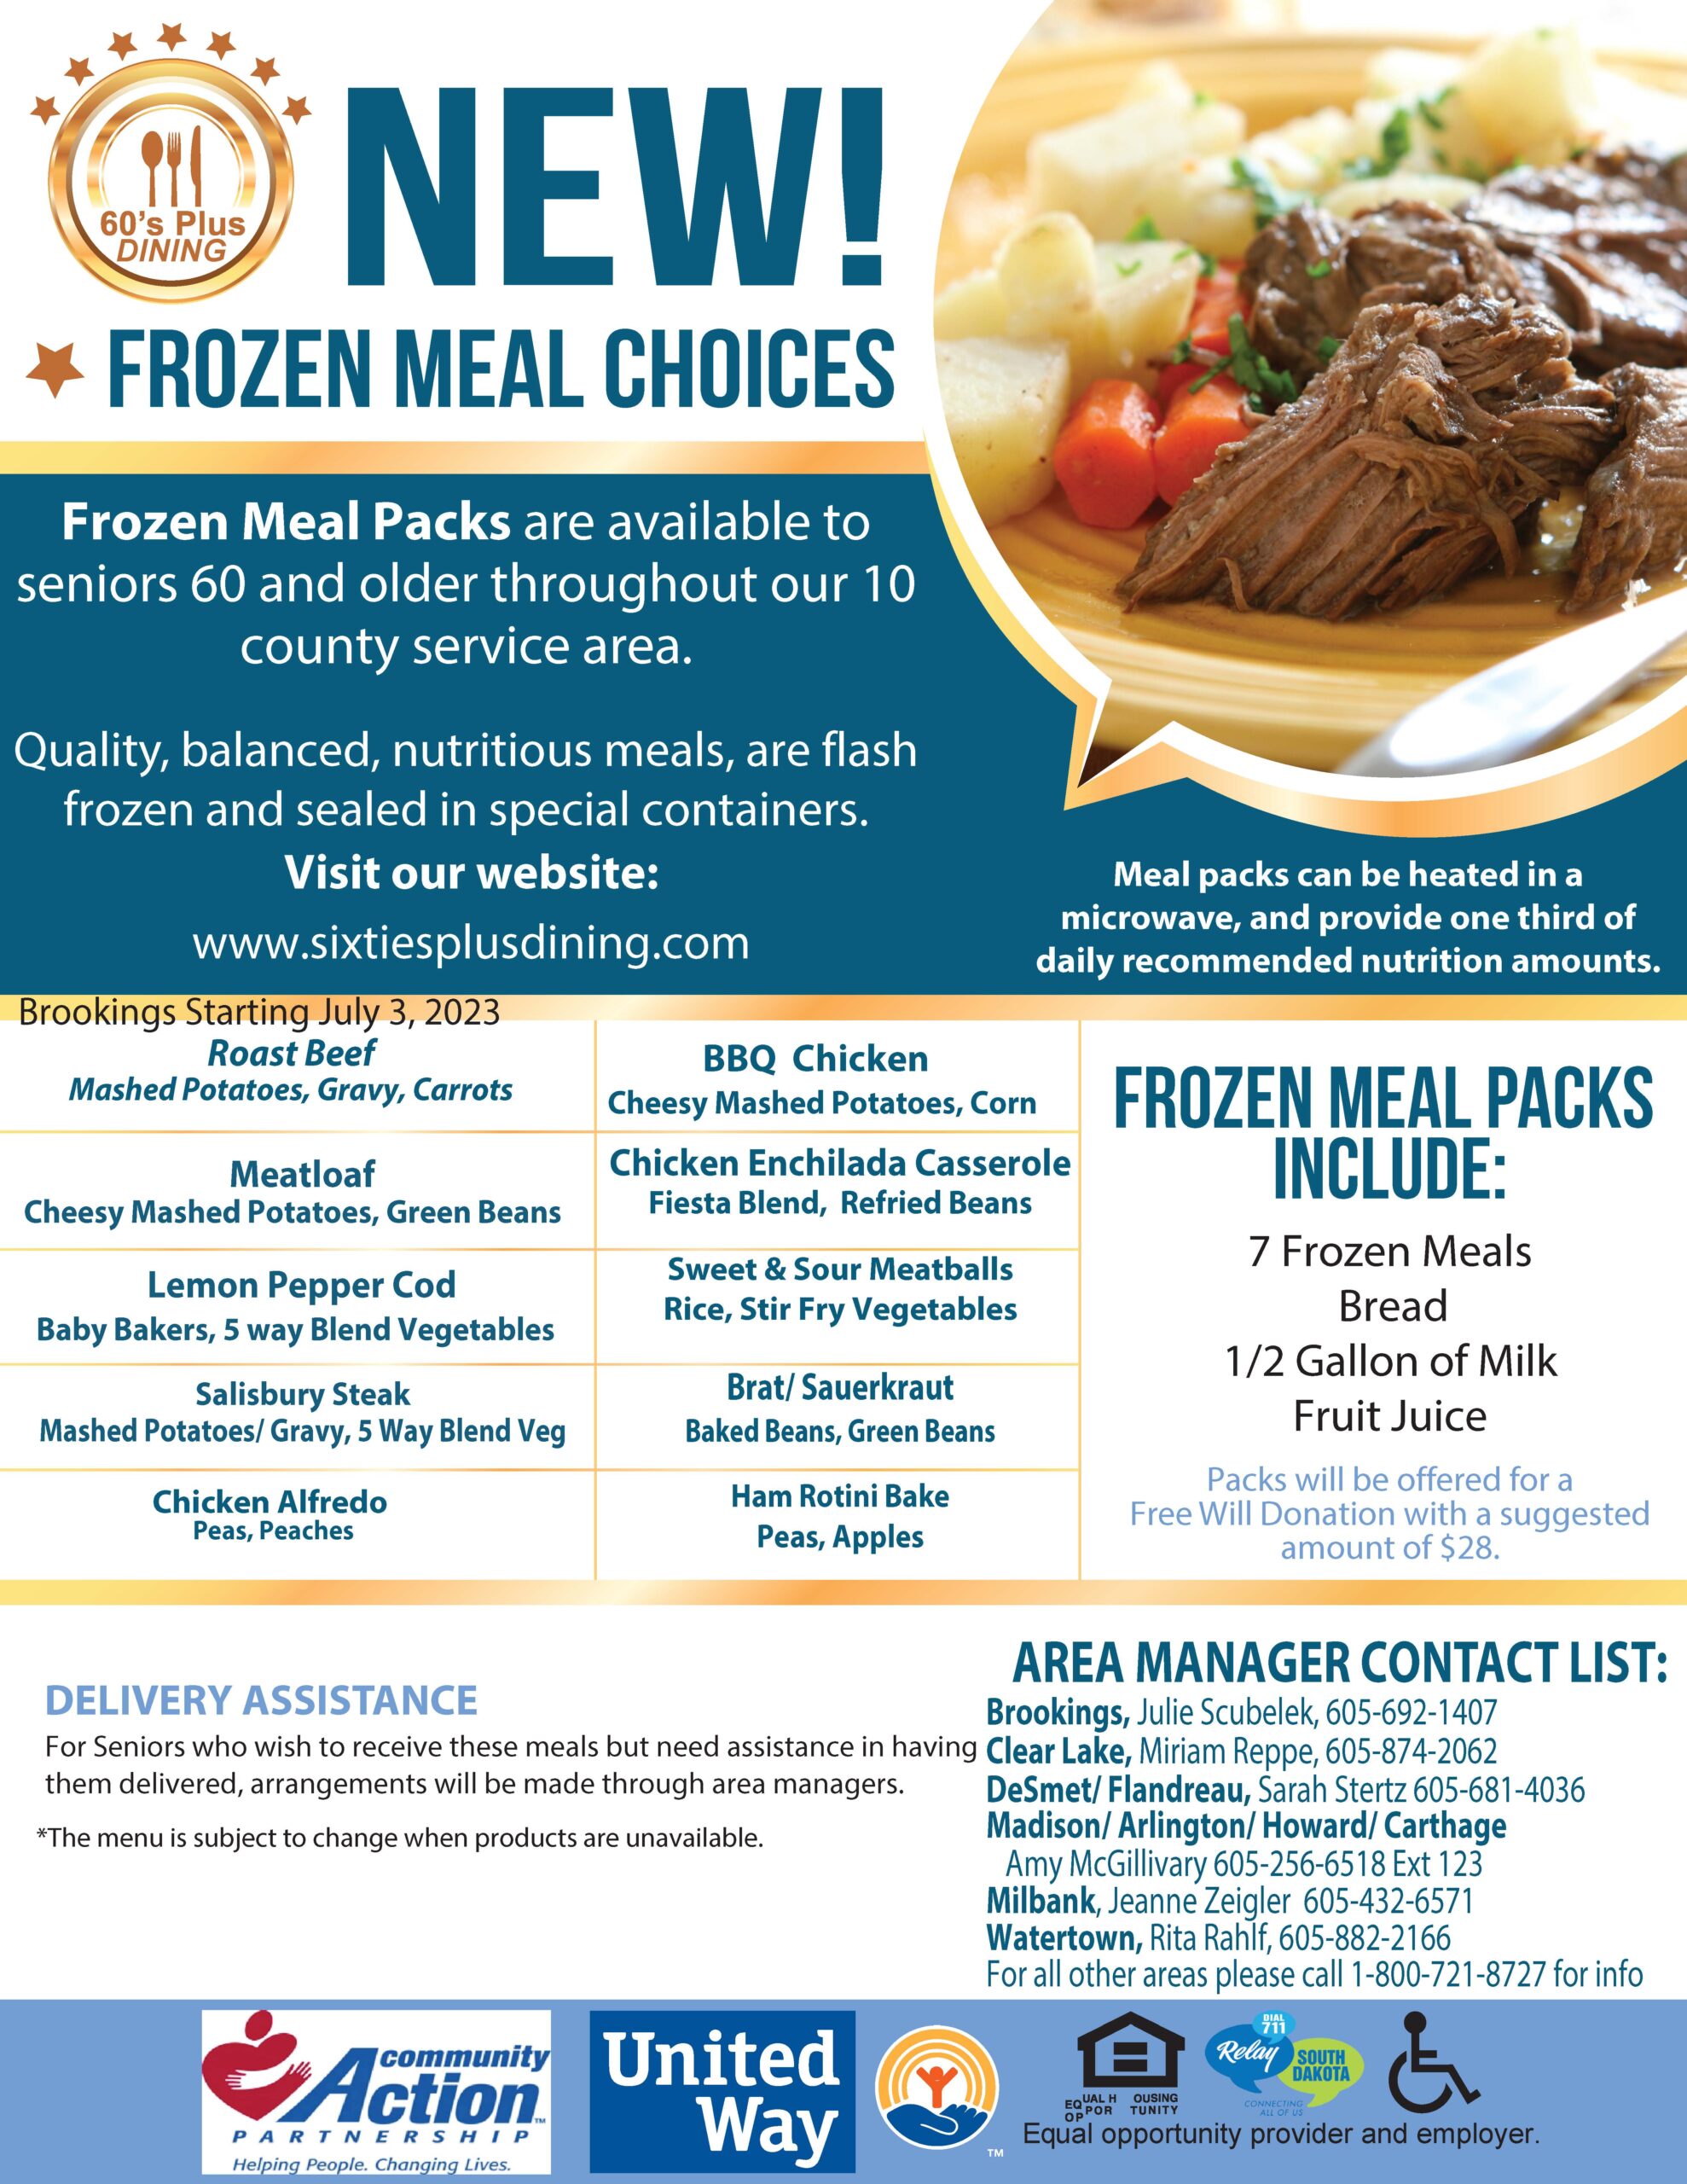 Brookings Frozen Meal Choices - July 2023